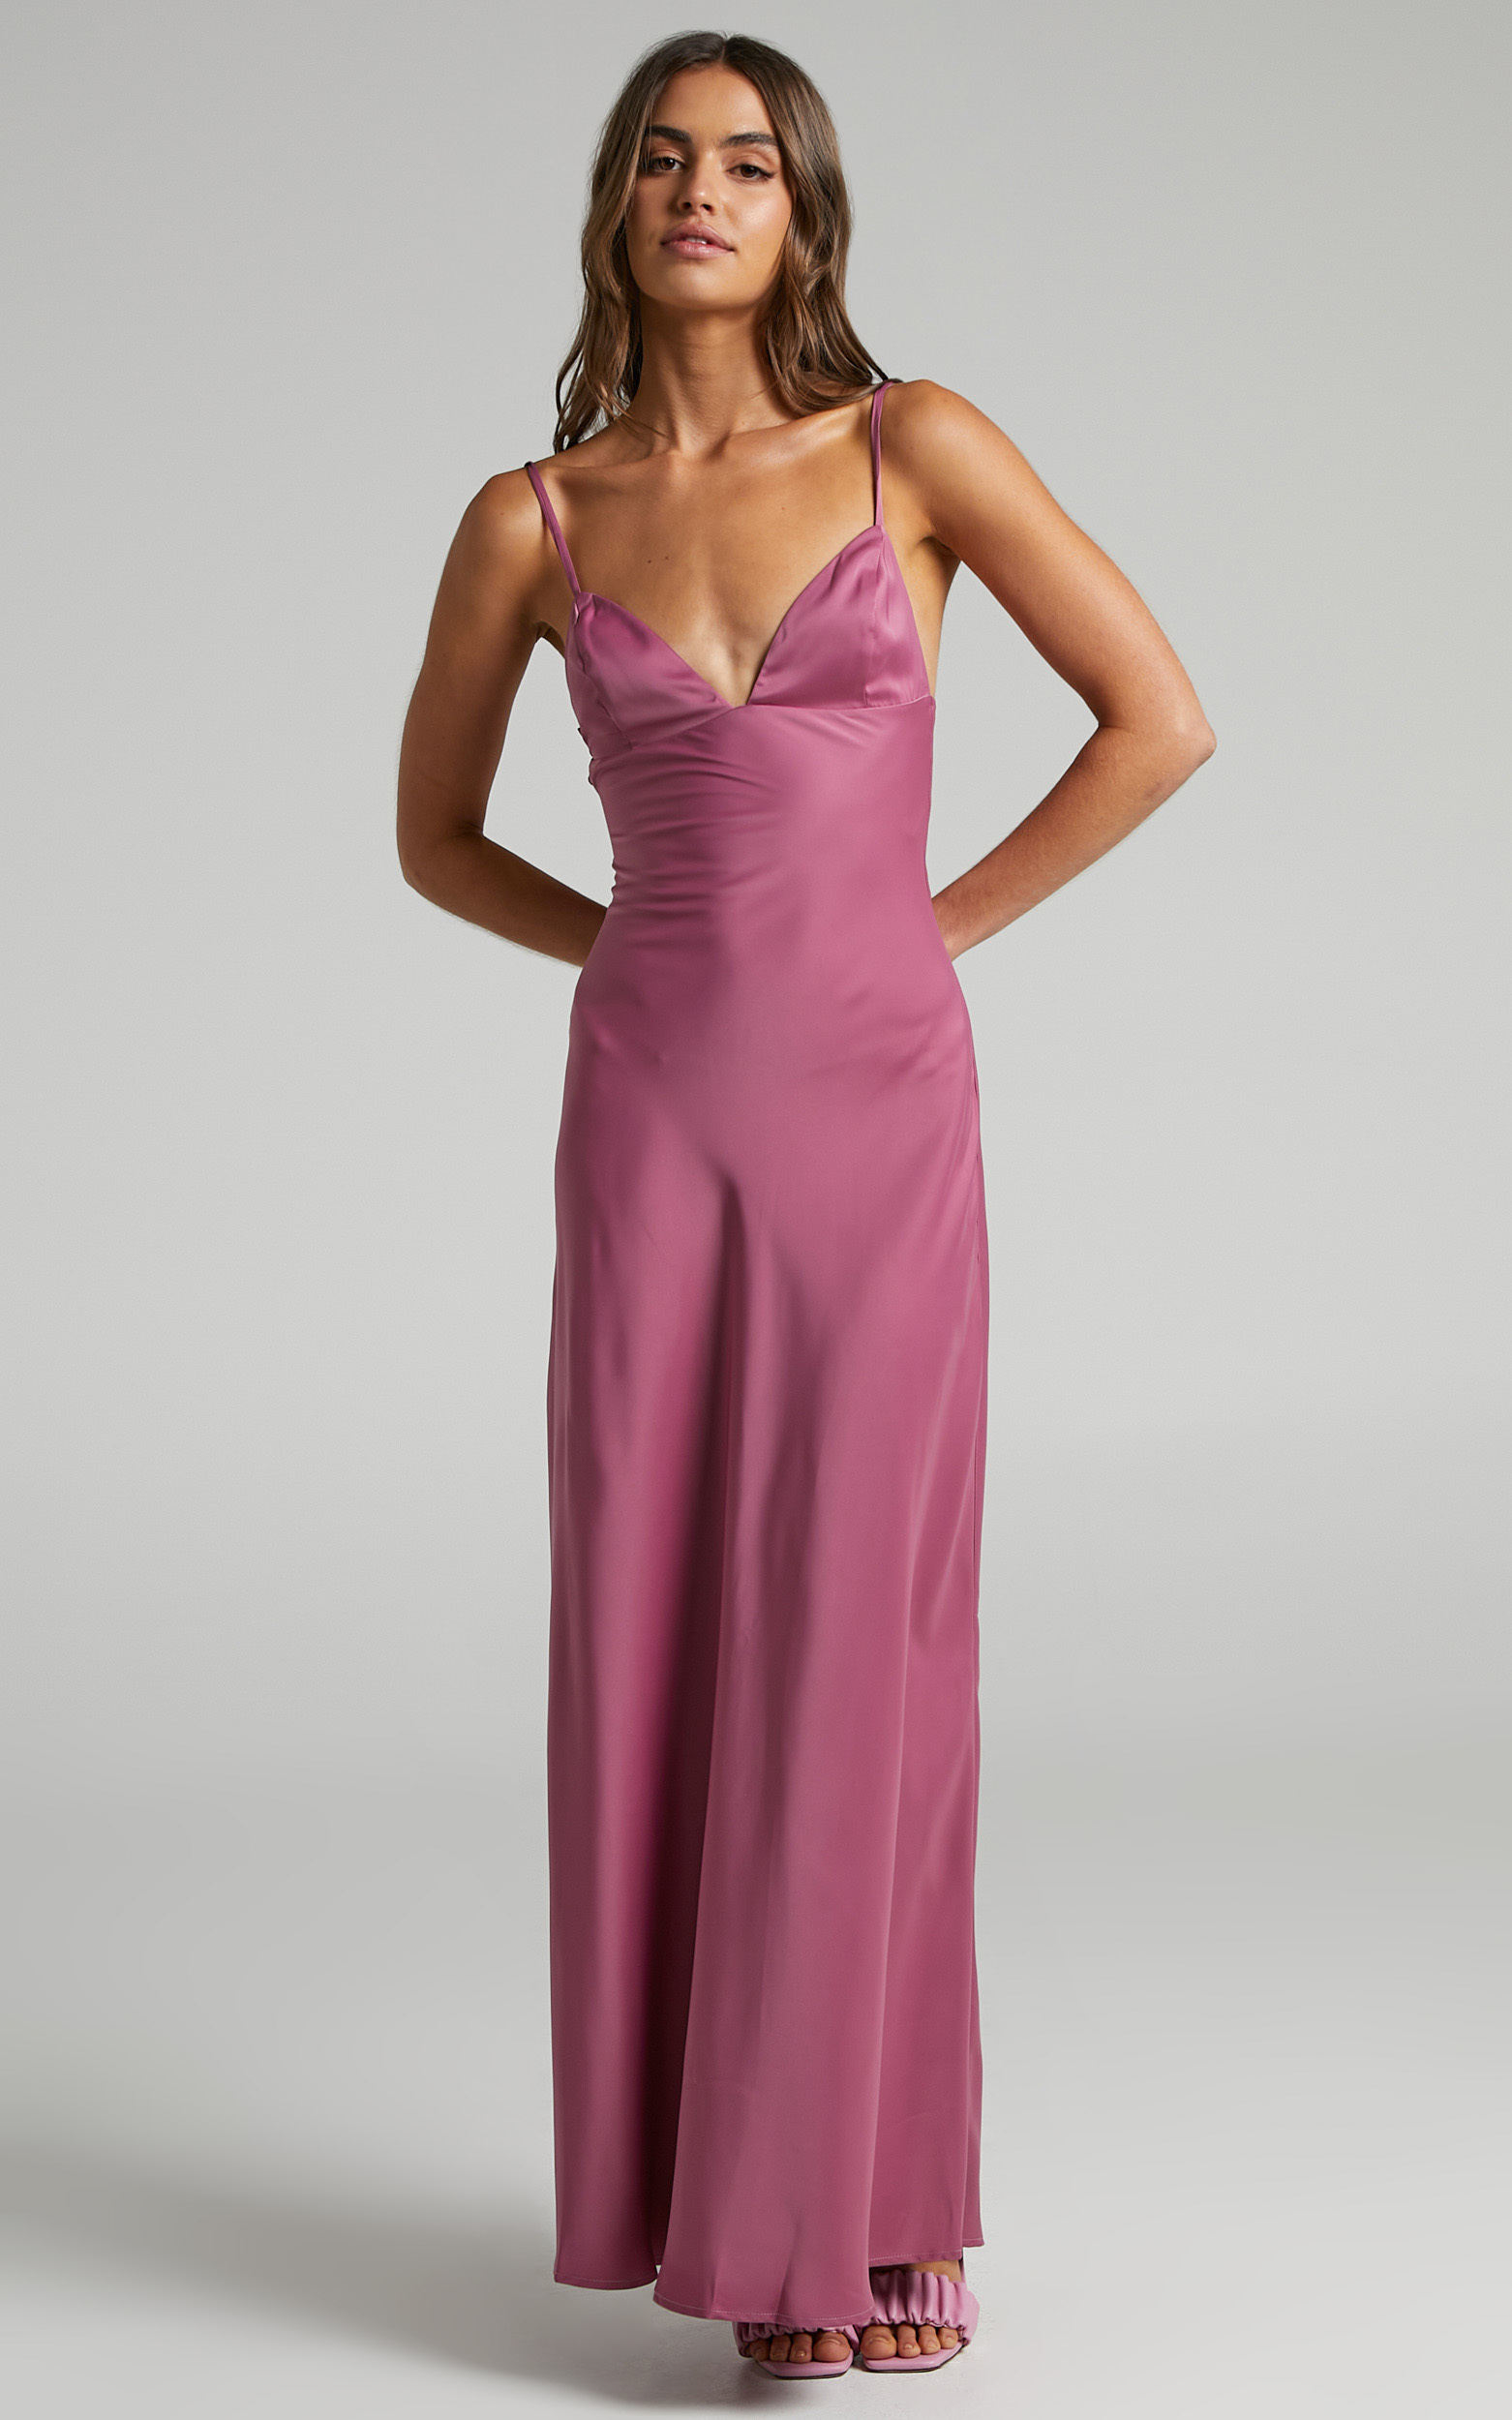 Cariela Plunge Neck Satin Maxi Dress in Orchid - 06, PNK2, hi-res image number null